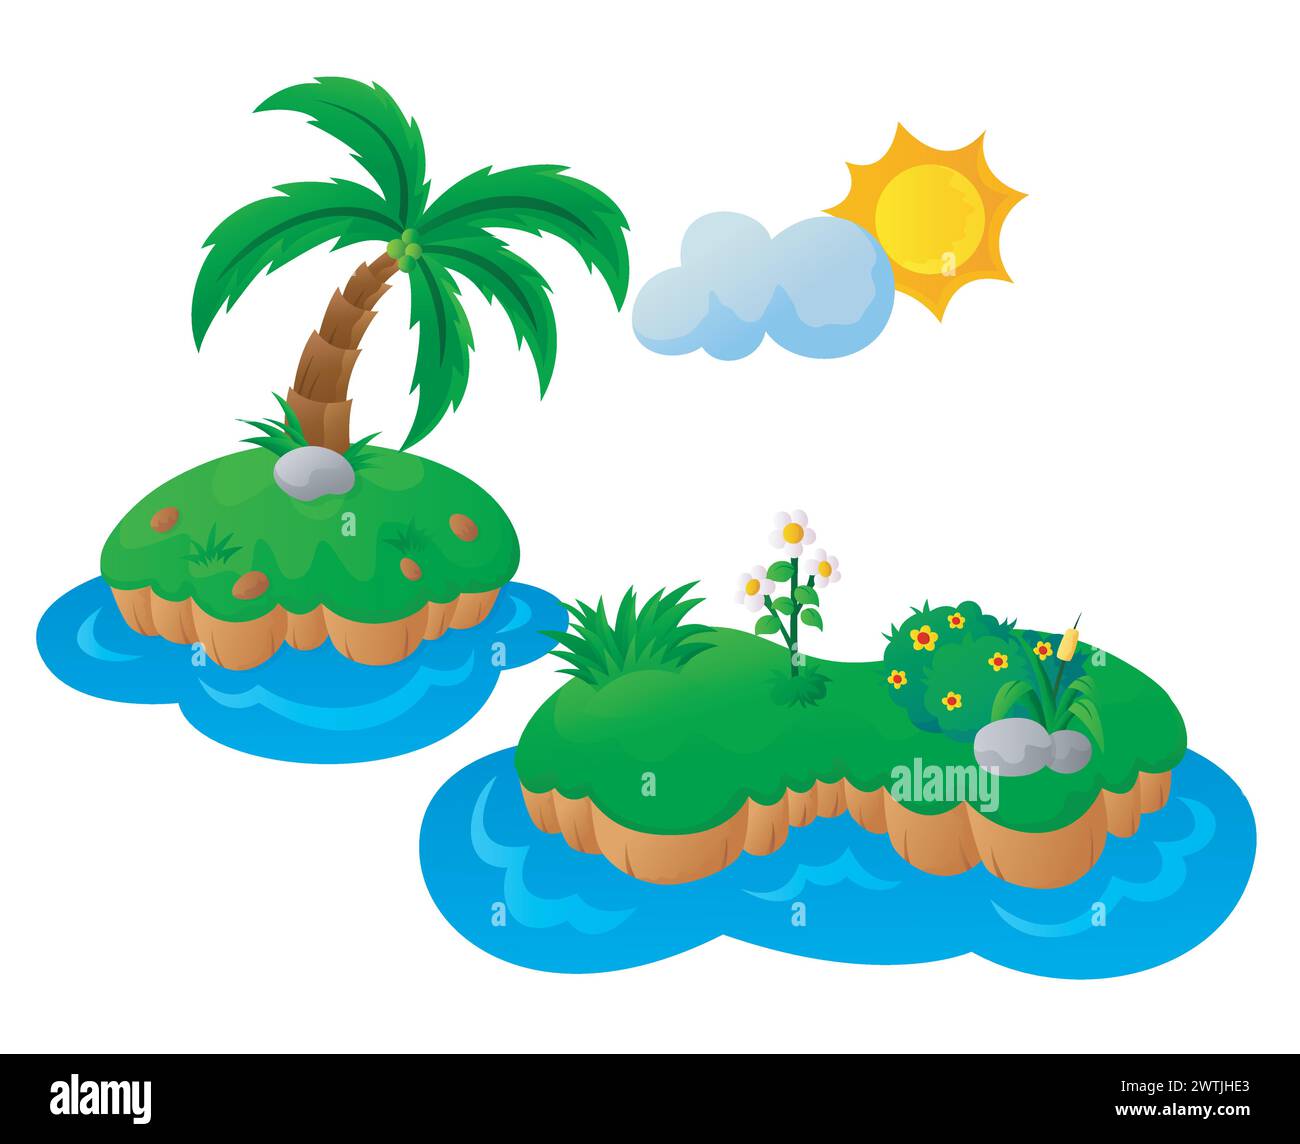 Coconut Tree and Some Flowers in Two Small Islands, Vector Illustration Stock Vector